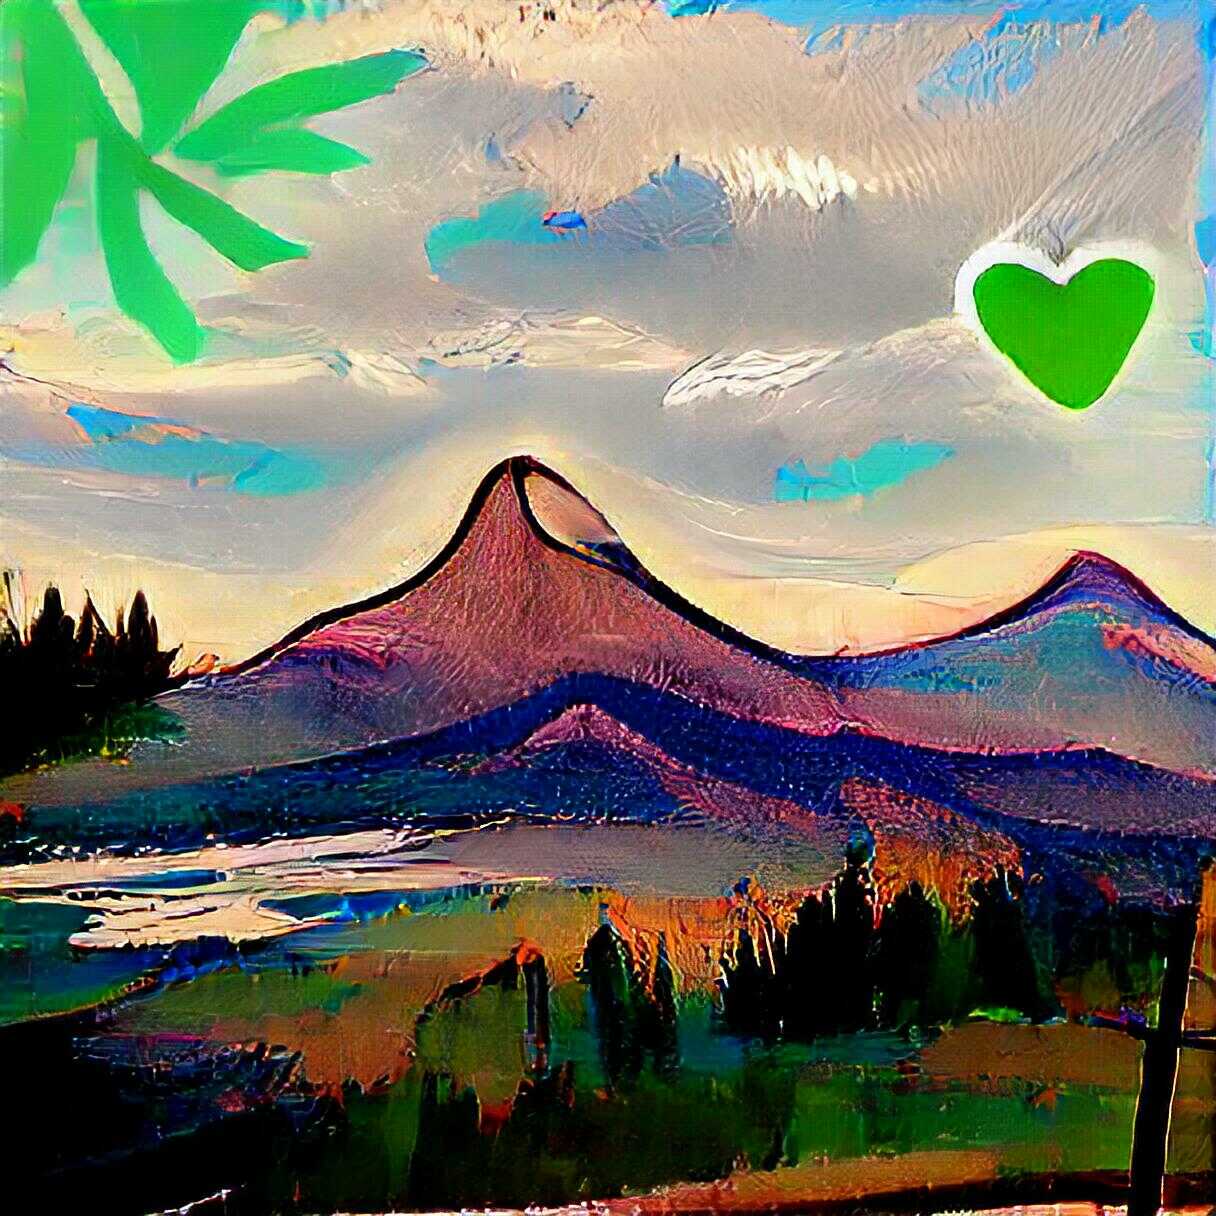 Landscape with mountain and green heart in the sky